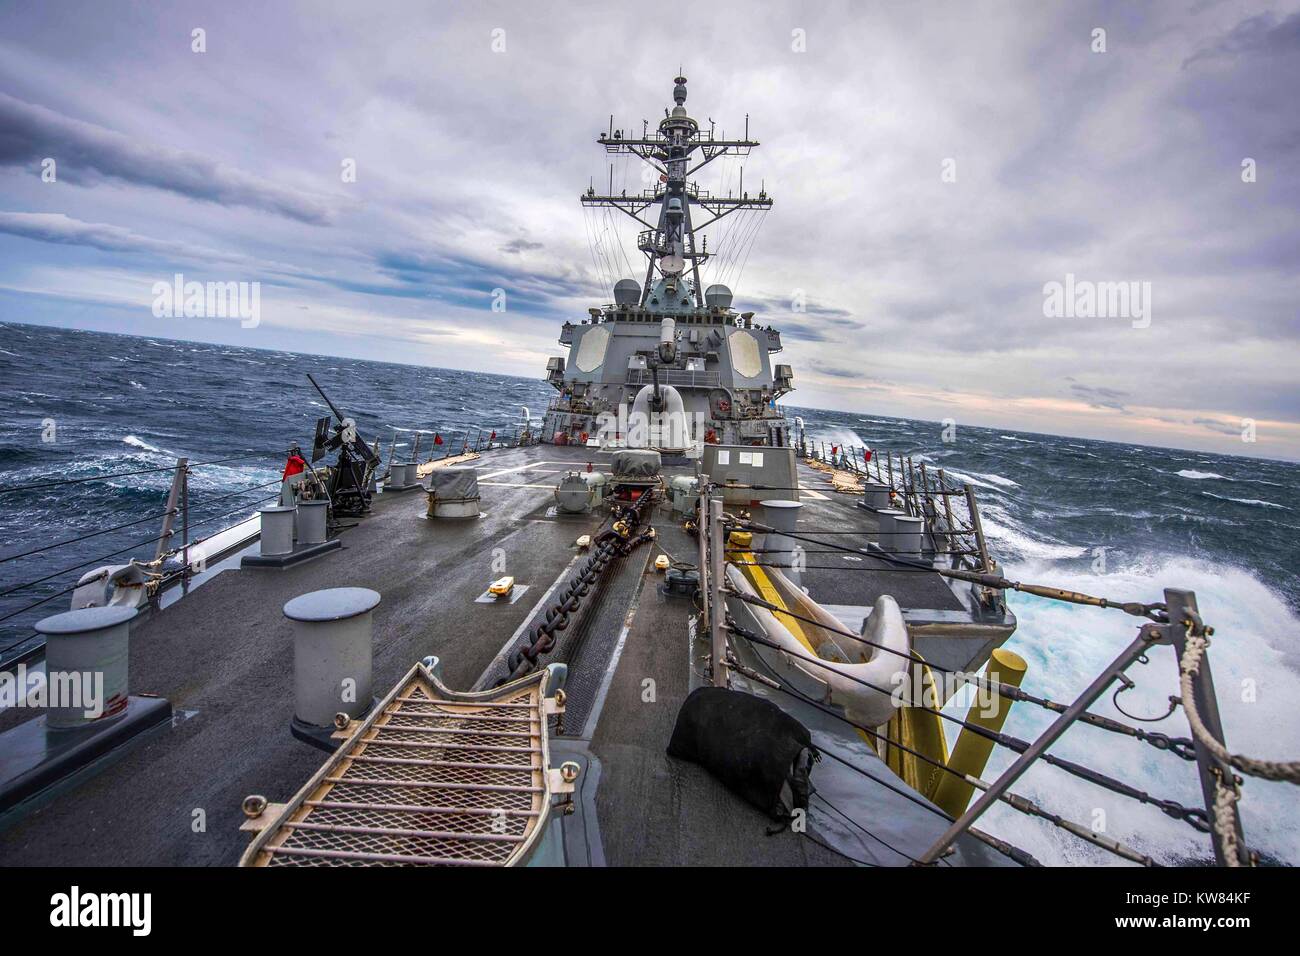 The Arleigh Burke-class guided-missile destroyer USS Carney (DDG 64) transits the Mediterranean Stock Photo